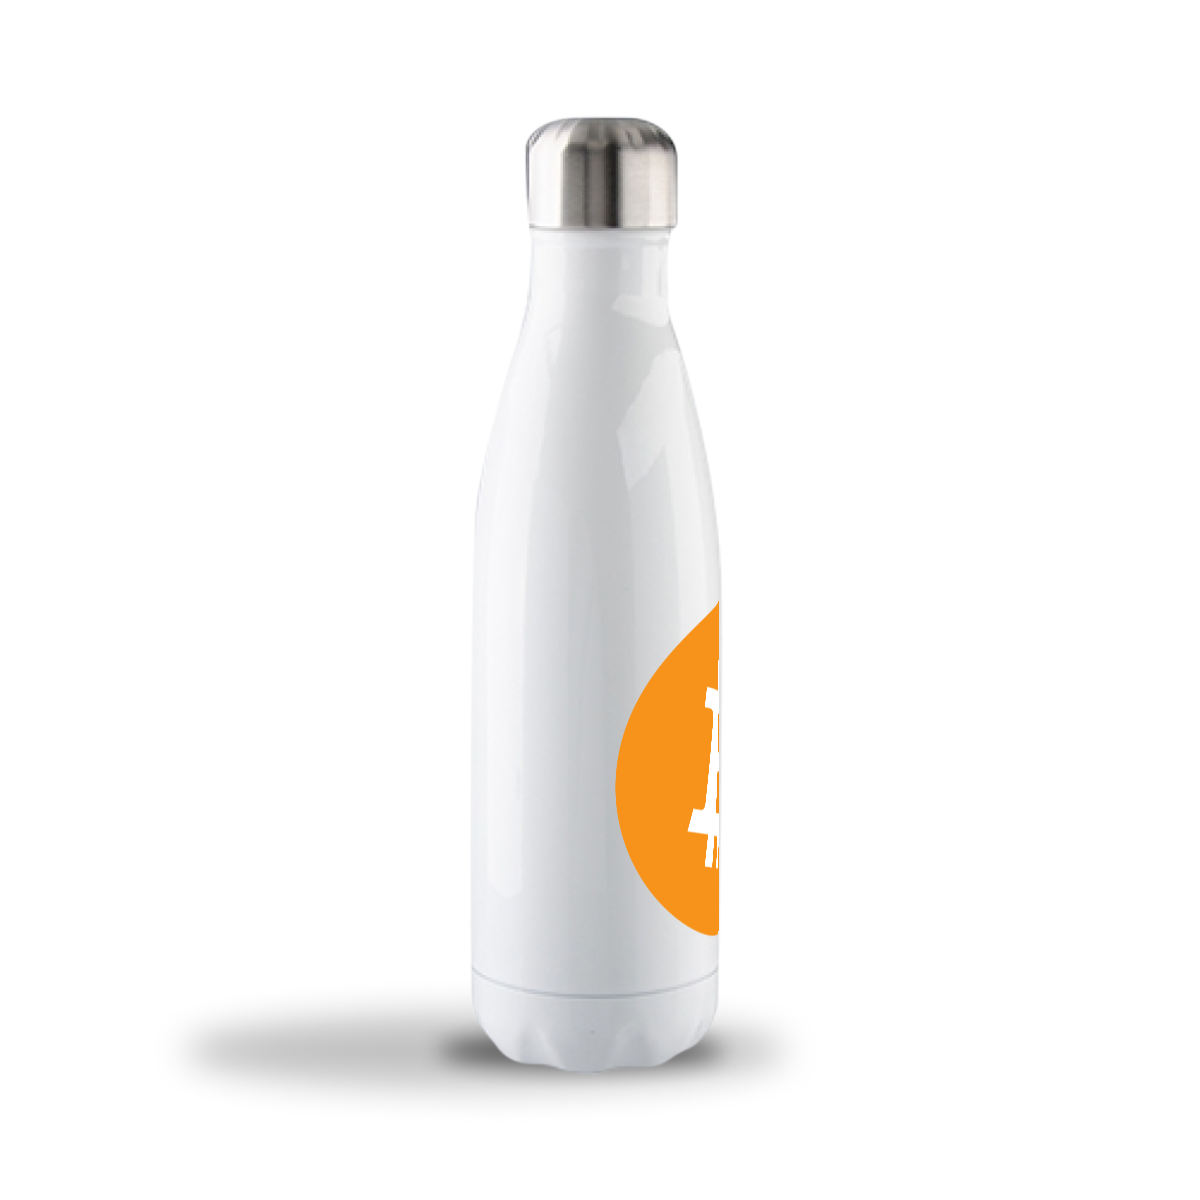 Bitcoin White bottle with stainless steel interior